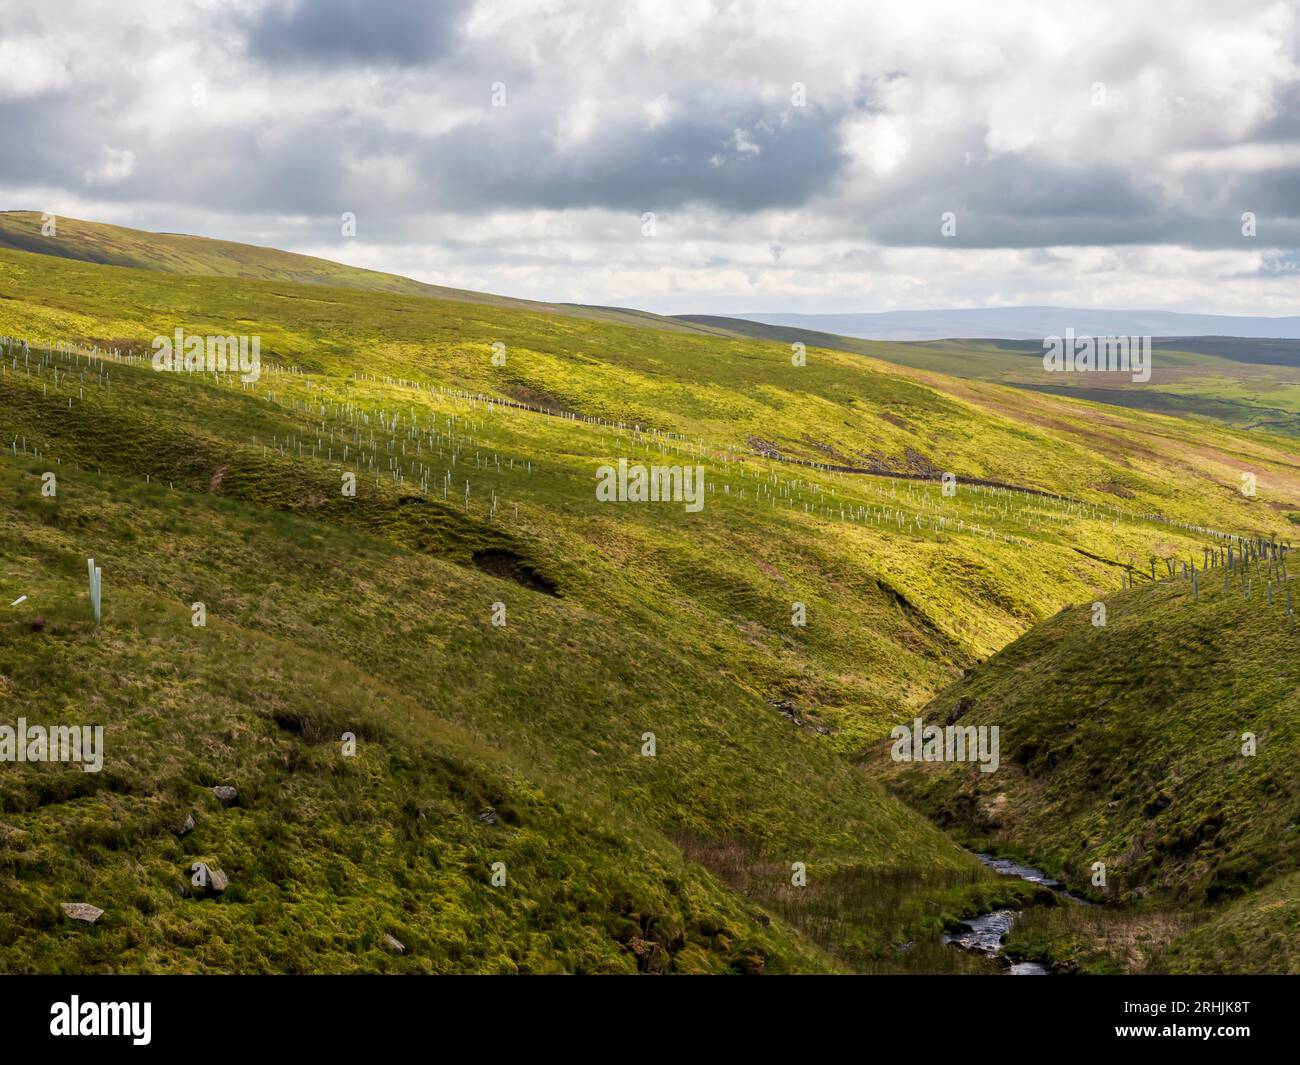 Tree planting at the head of Kingsdale, Yorkshire Dales, UK. Stock Photo